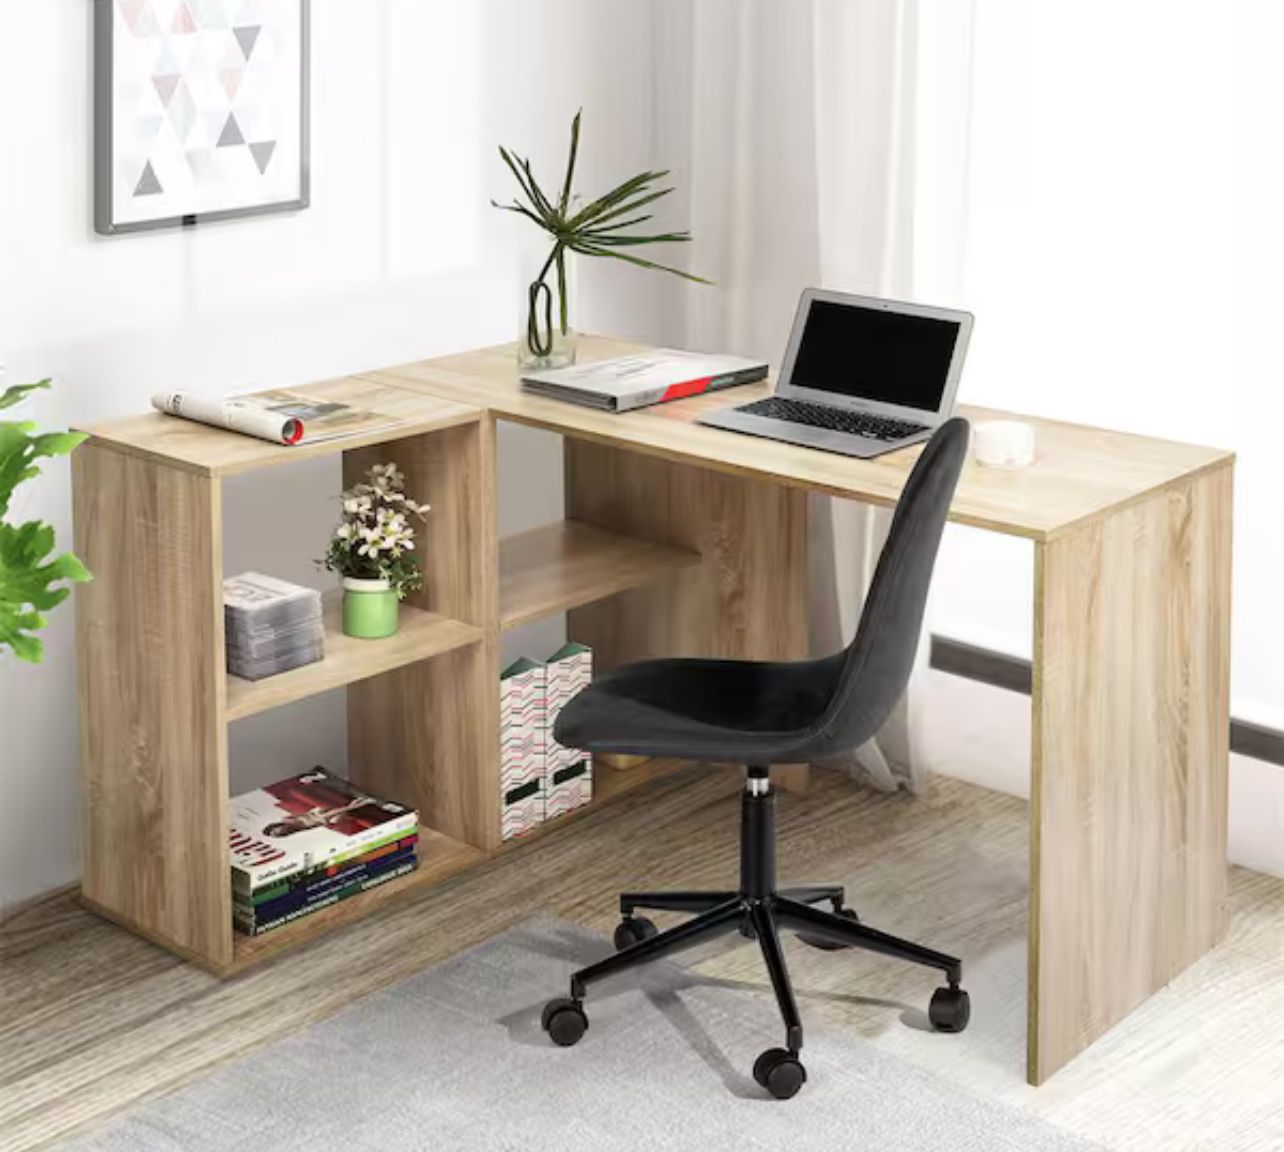 Rectangle Brown MDF Computer Desk with 4-Open Shelves